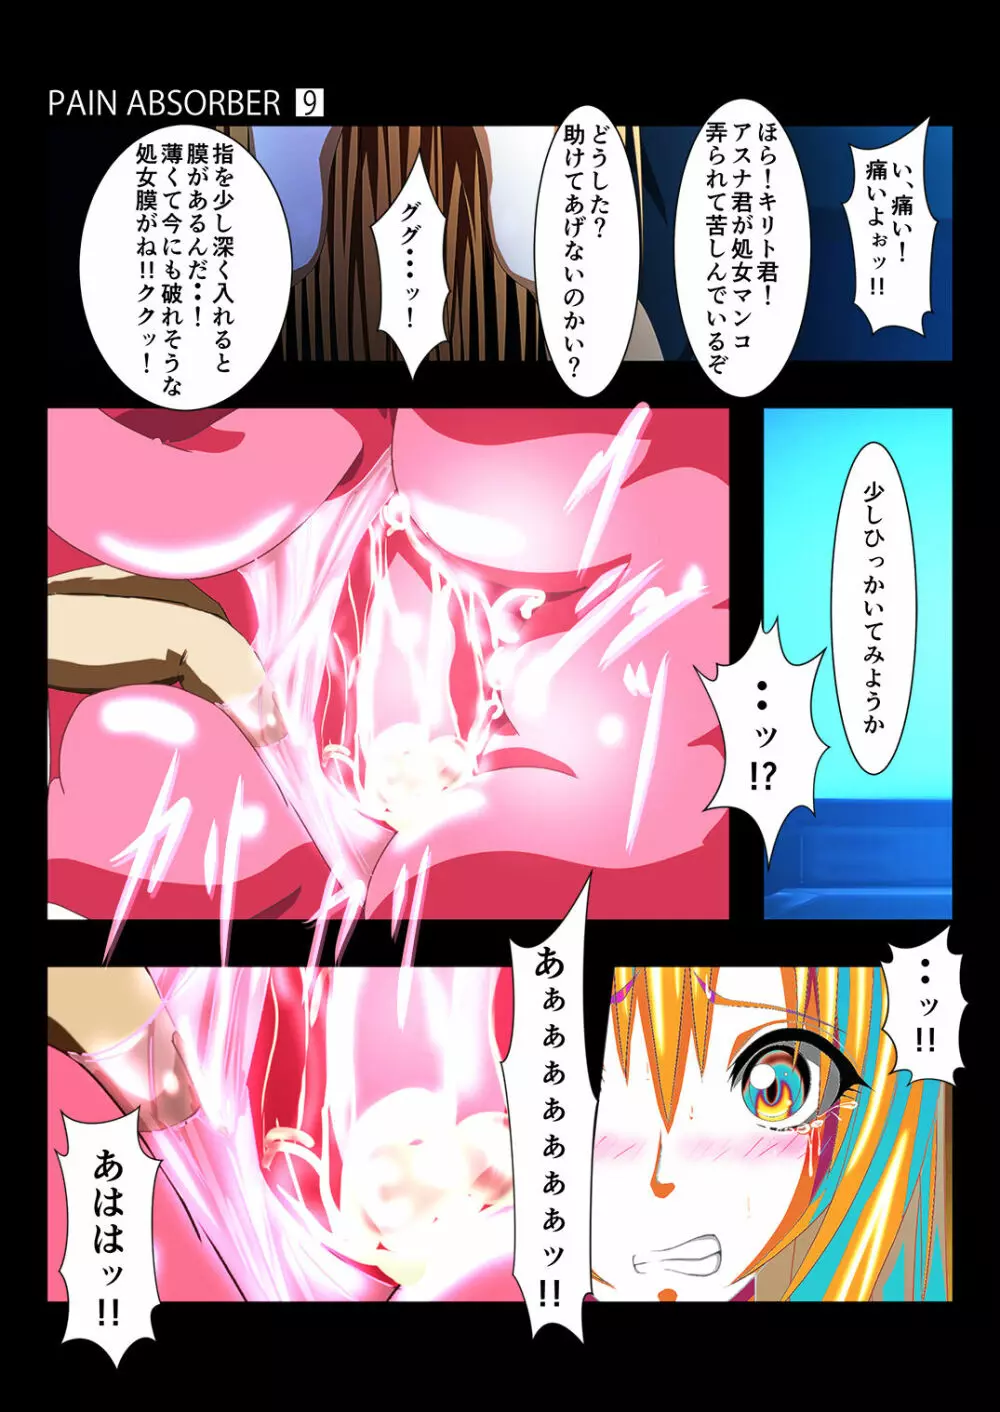 PAIN ABSORBER Episode.9 52ページ